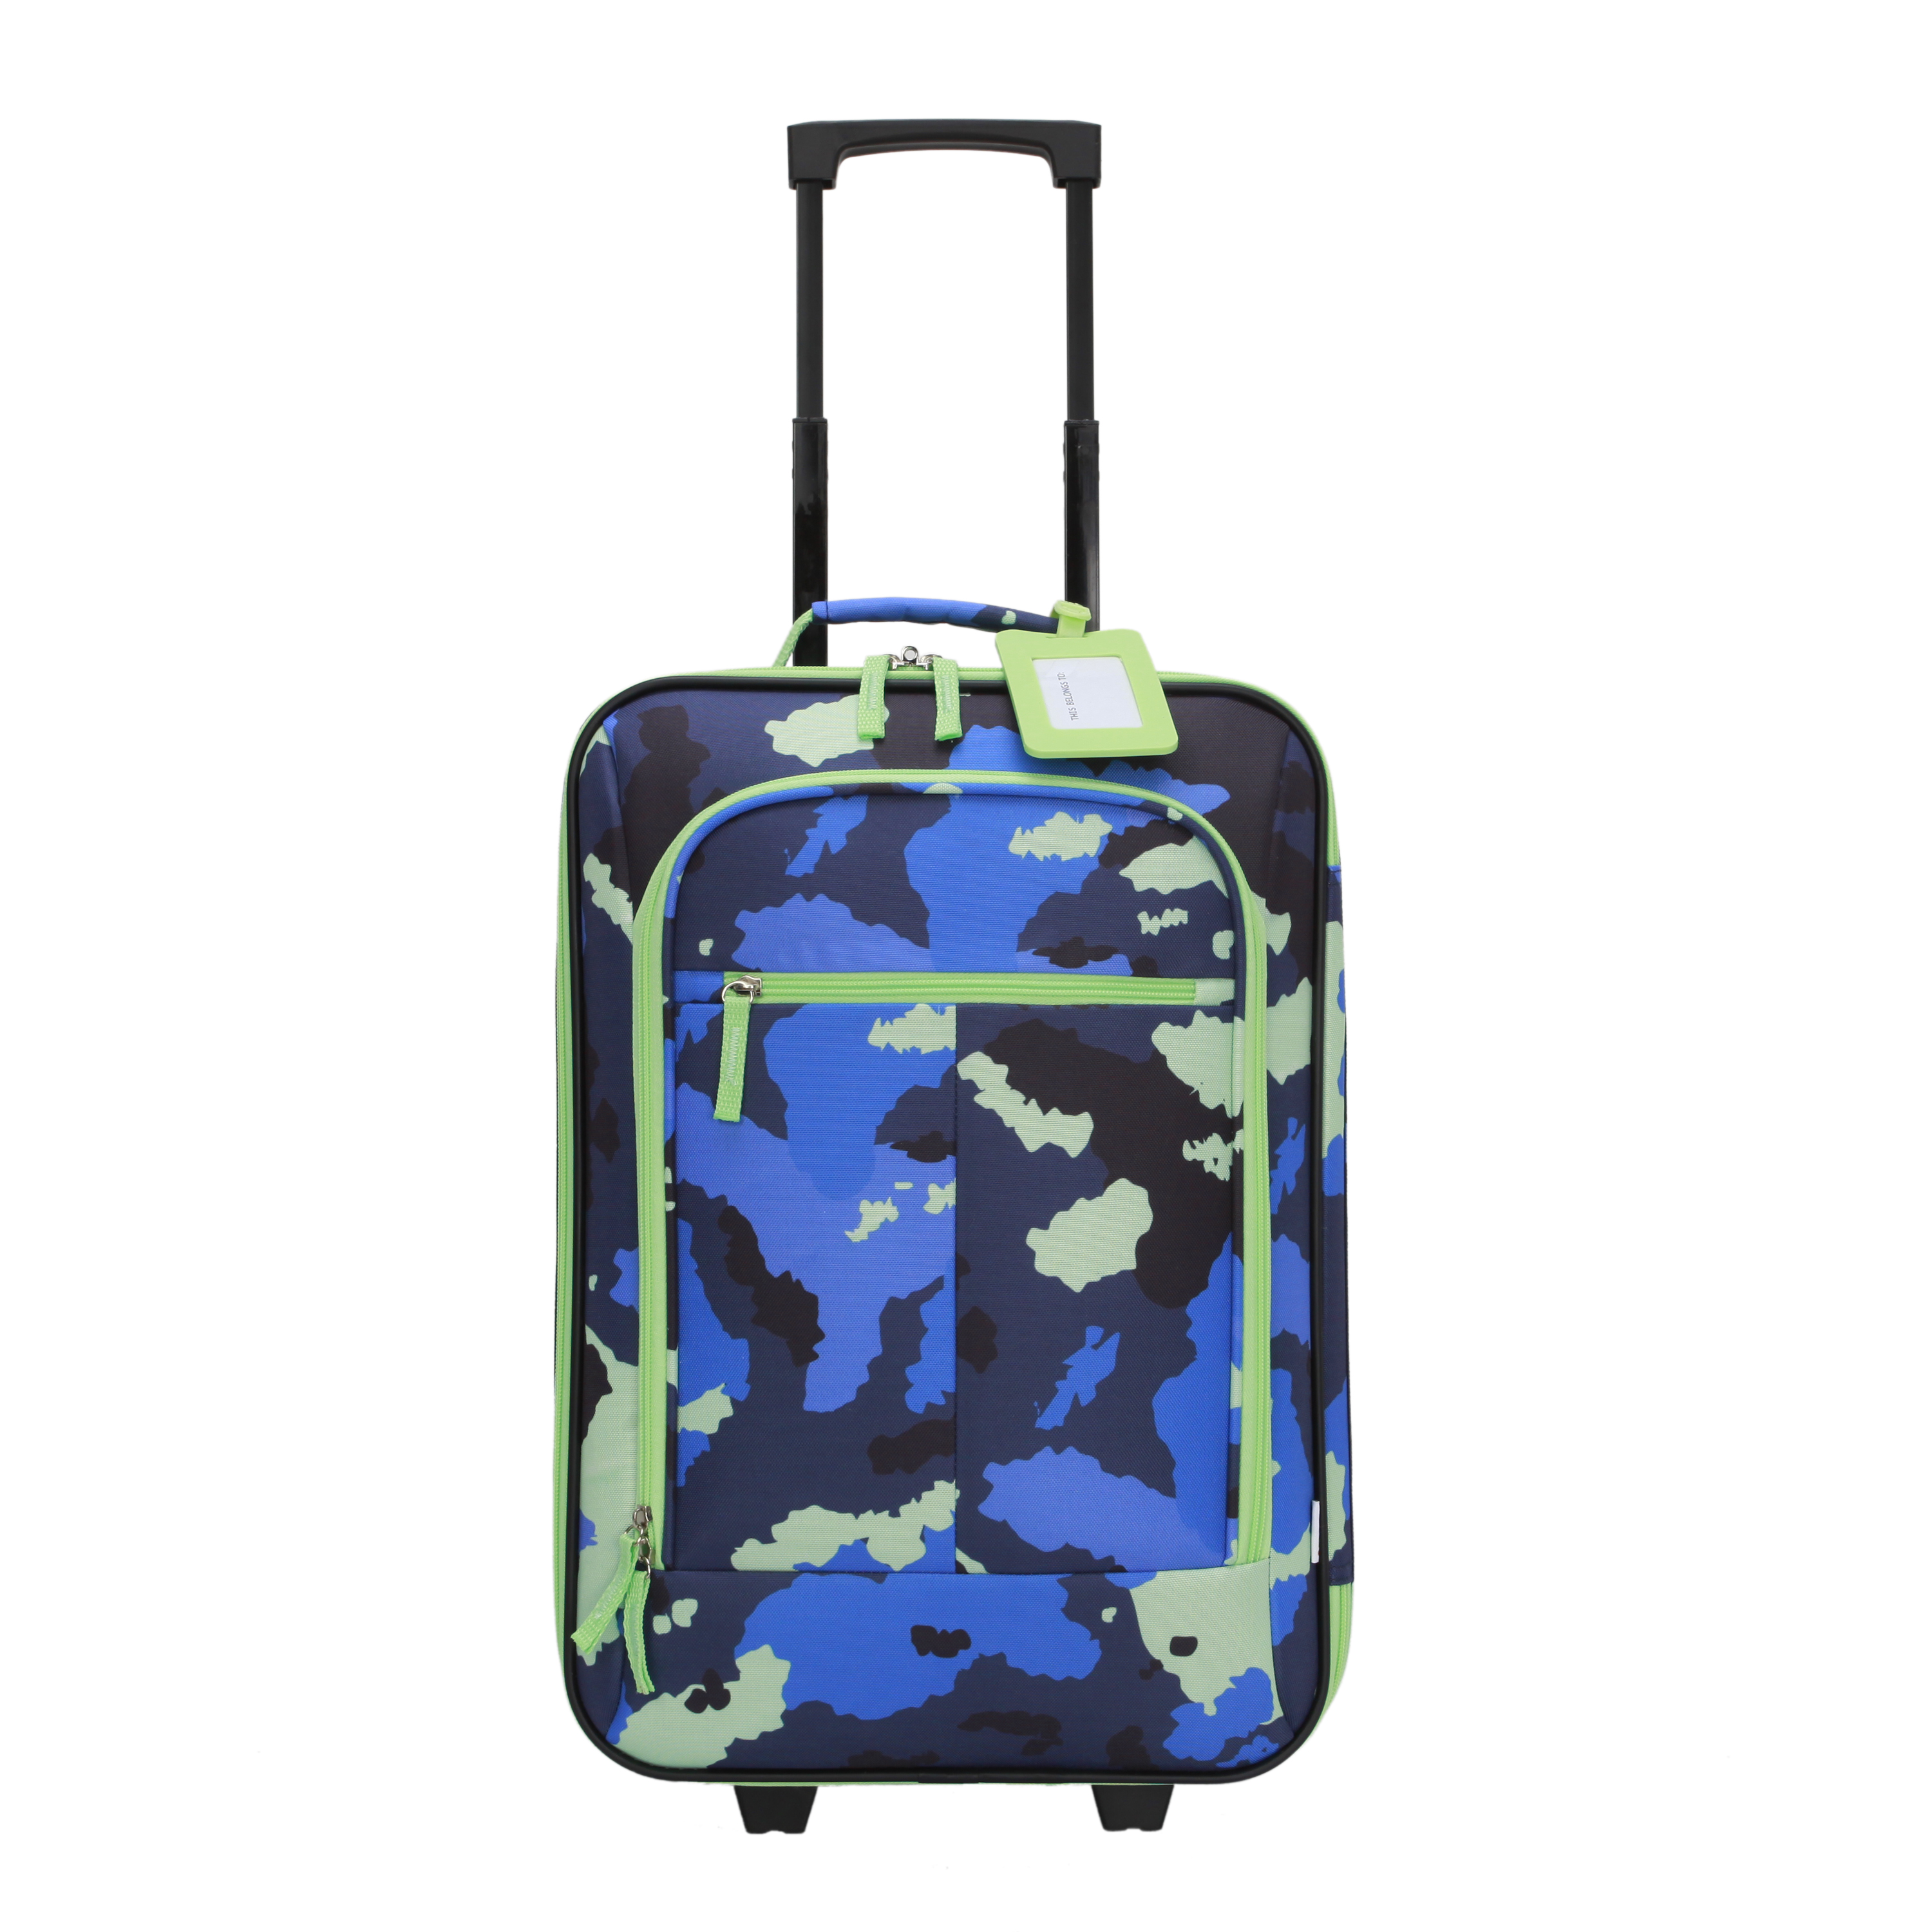 CRCKT 4 Piece 18-inch Soft side Carry-on Kids Luggage Set, Blue Camo - image 2 of 23